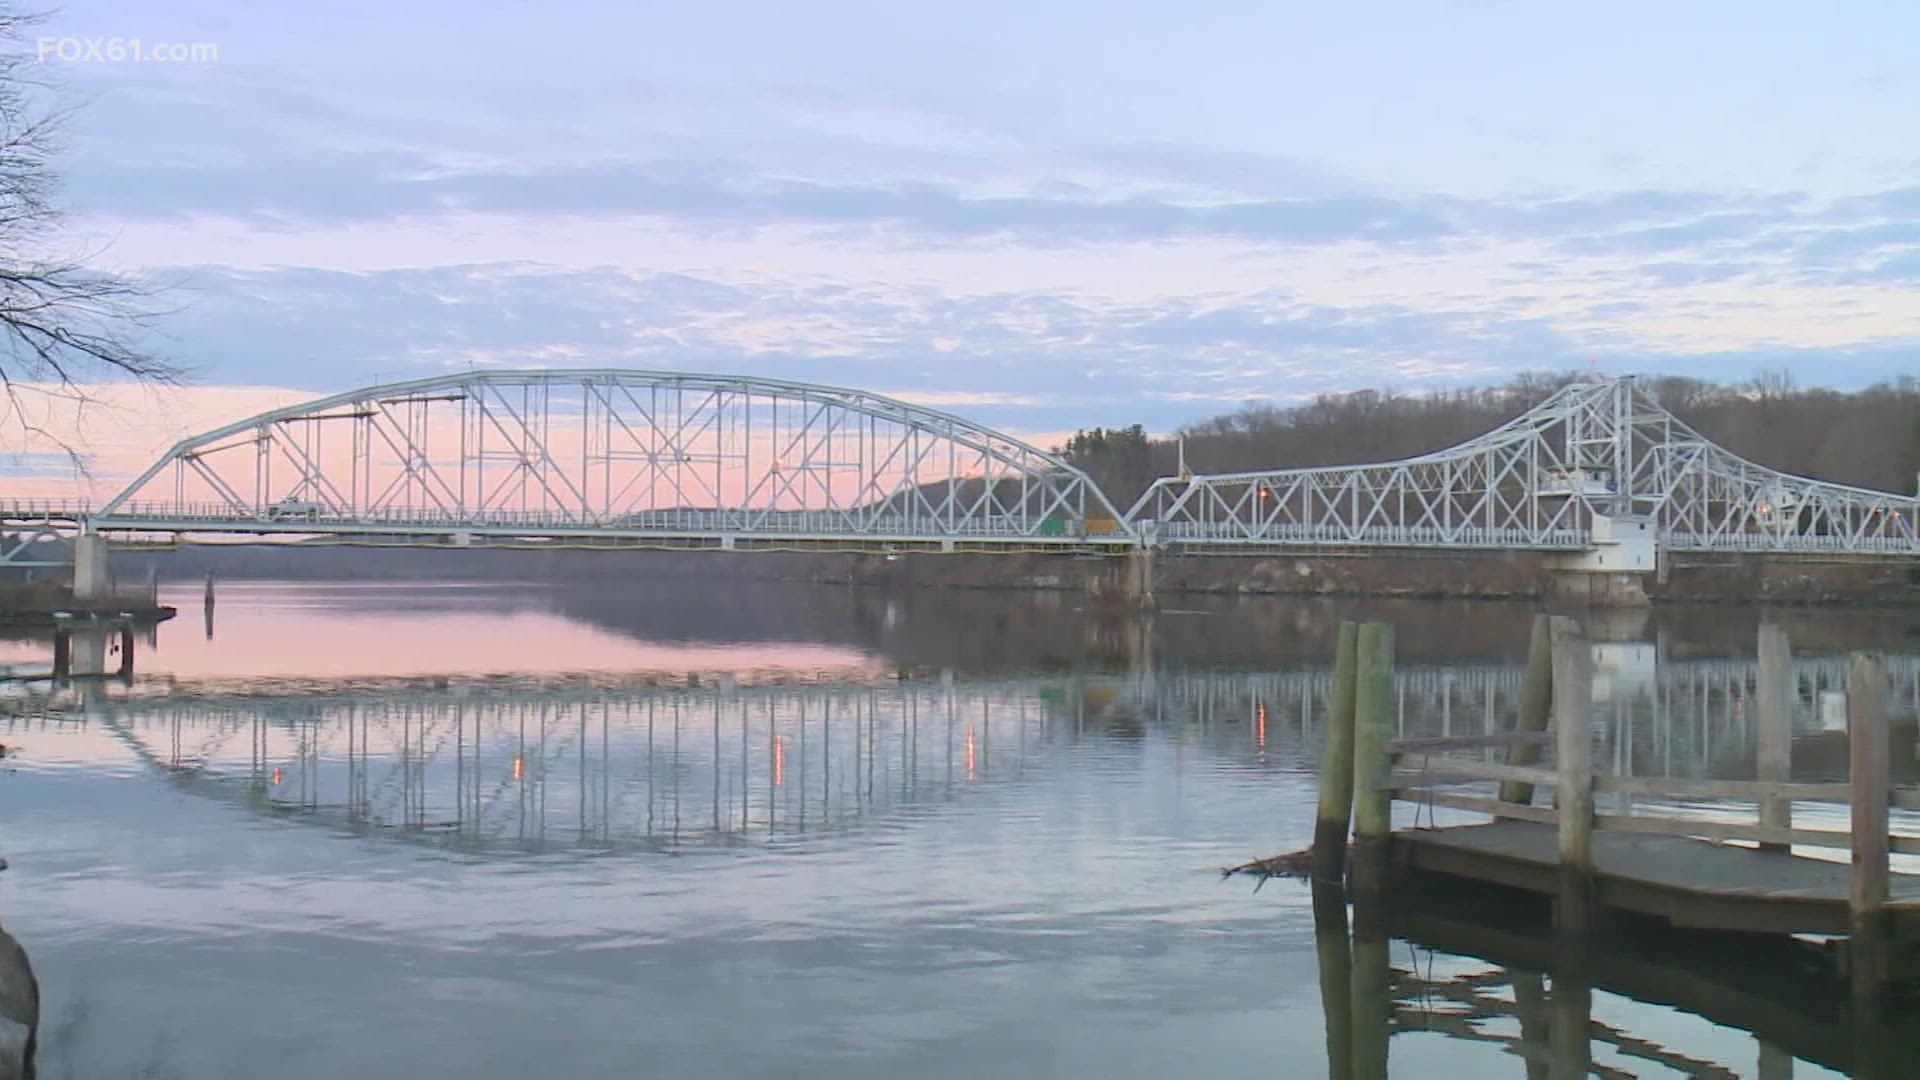 The bridge has spanned the Connecticut River for 110 years, and the eastern end is the home of the Goodspeed Opera House.